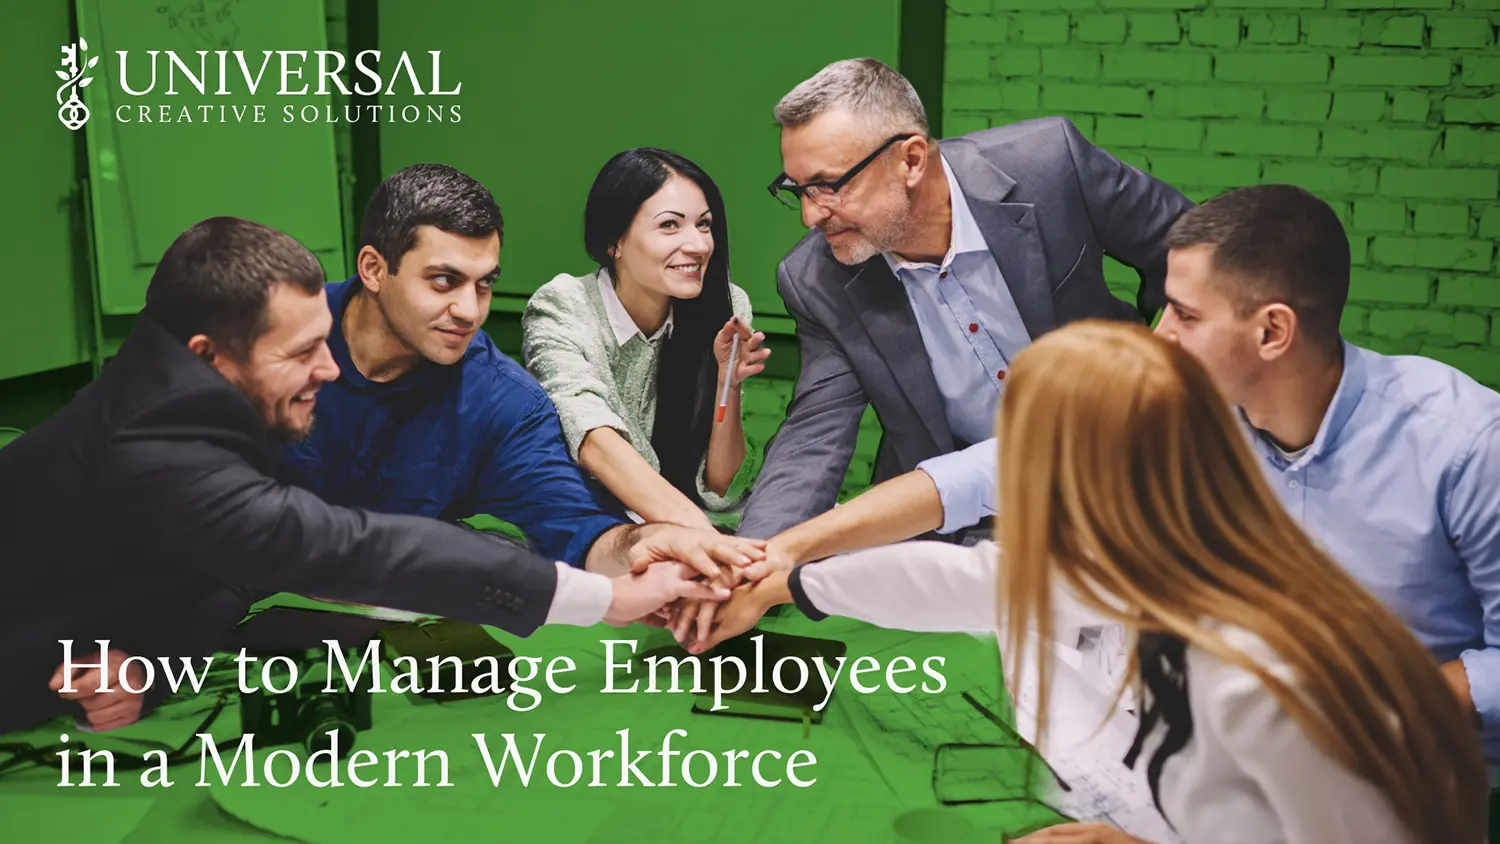 How to Manage Employees in a Modern Workforce